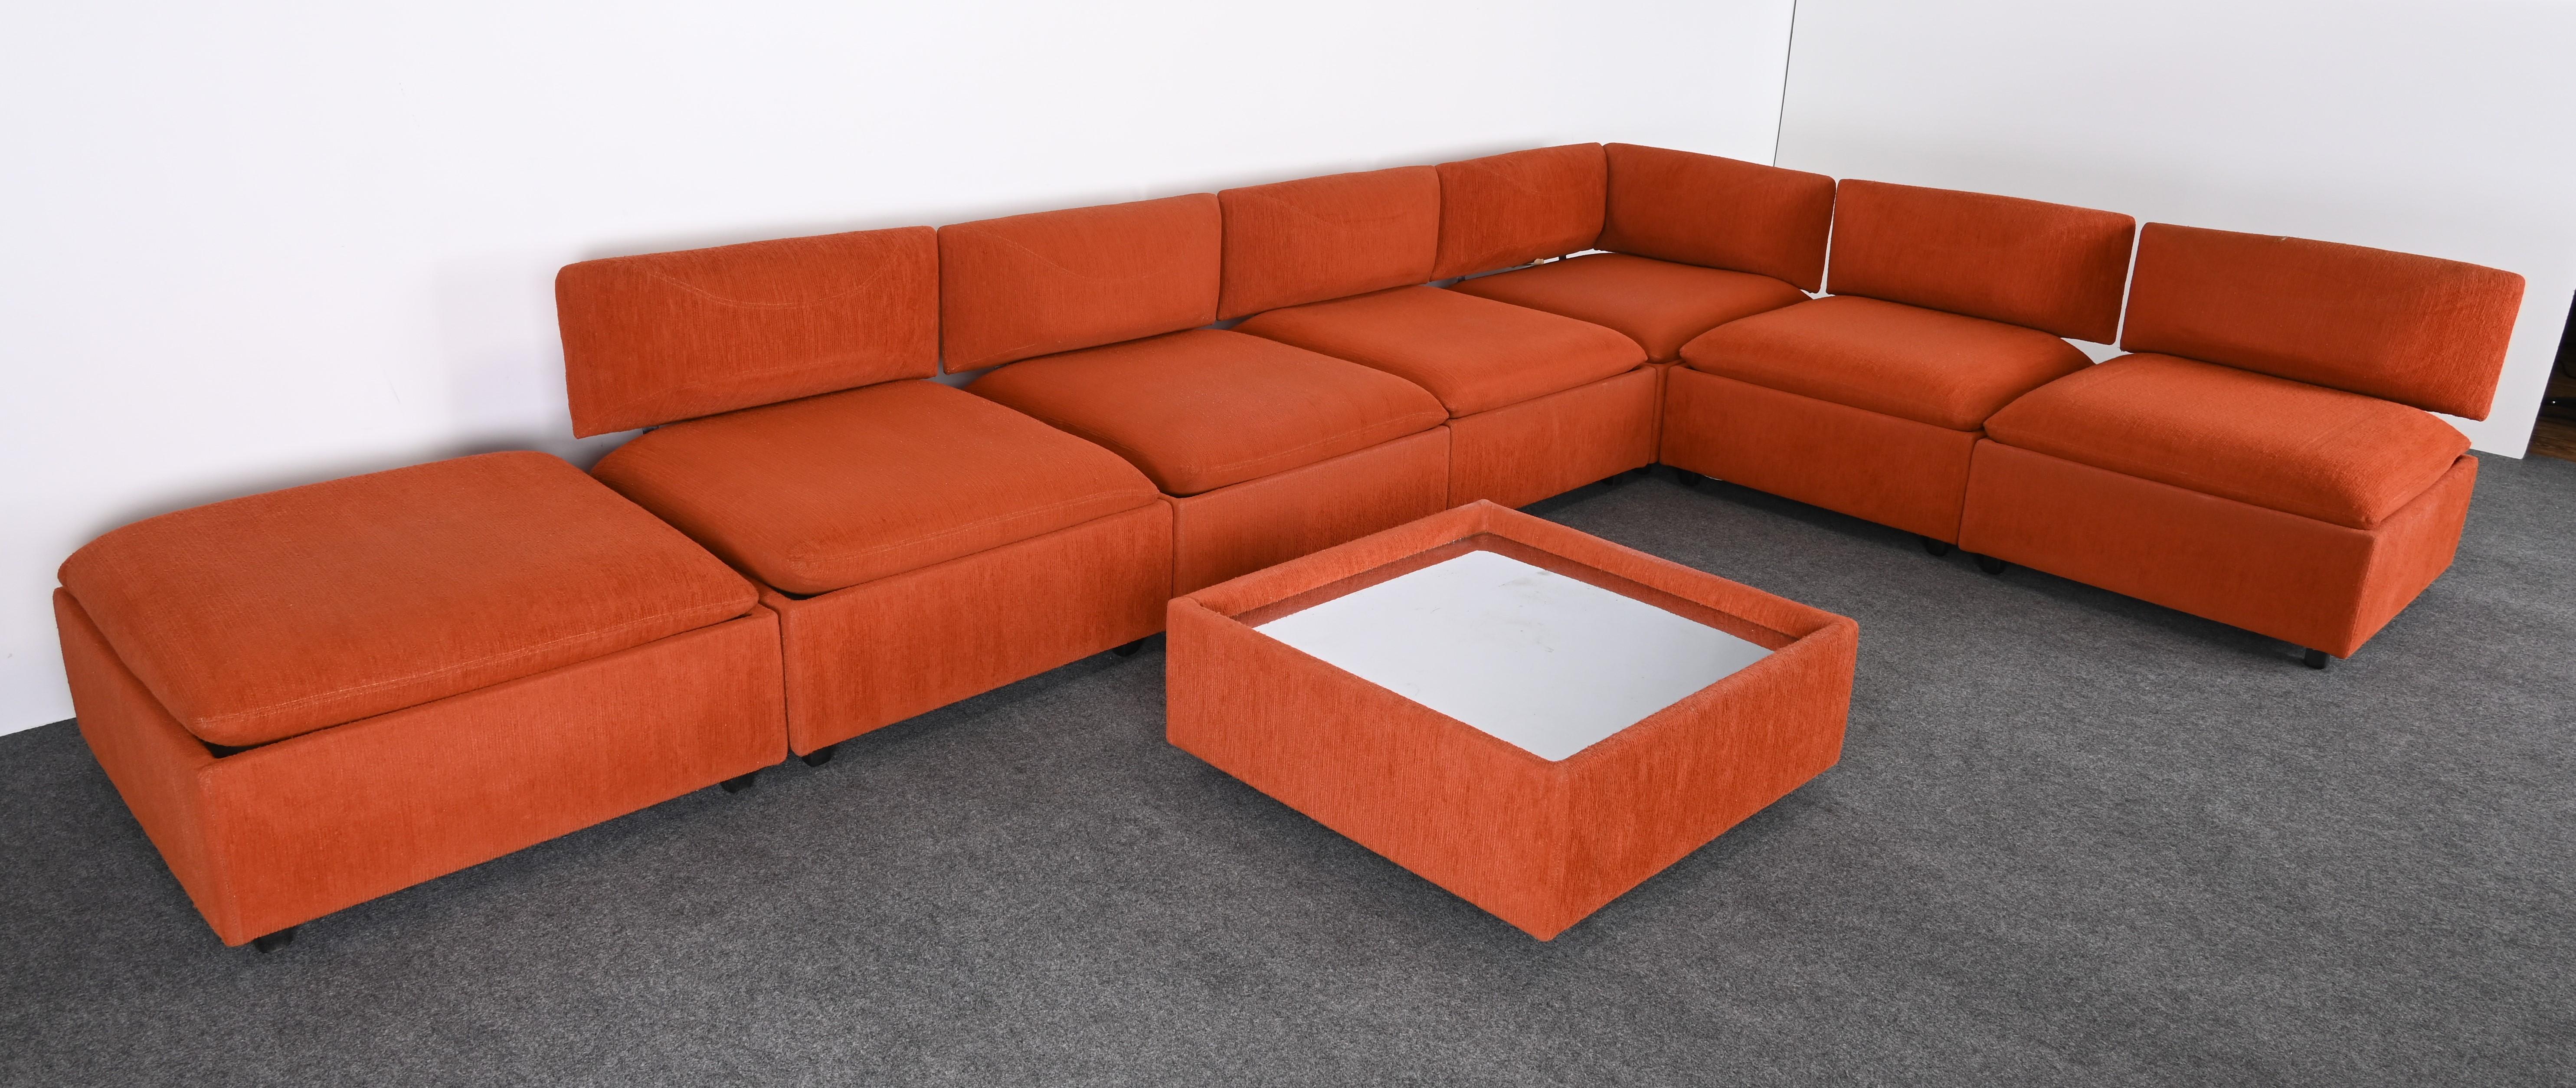 Eight Piece Sectional Sofa by Adrian Pearsall for Craft, 1970s 5